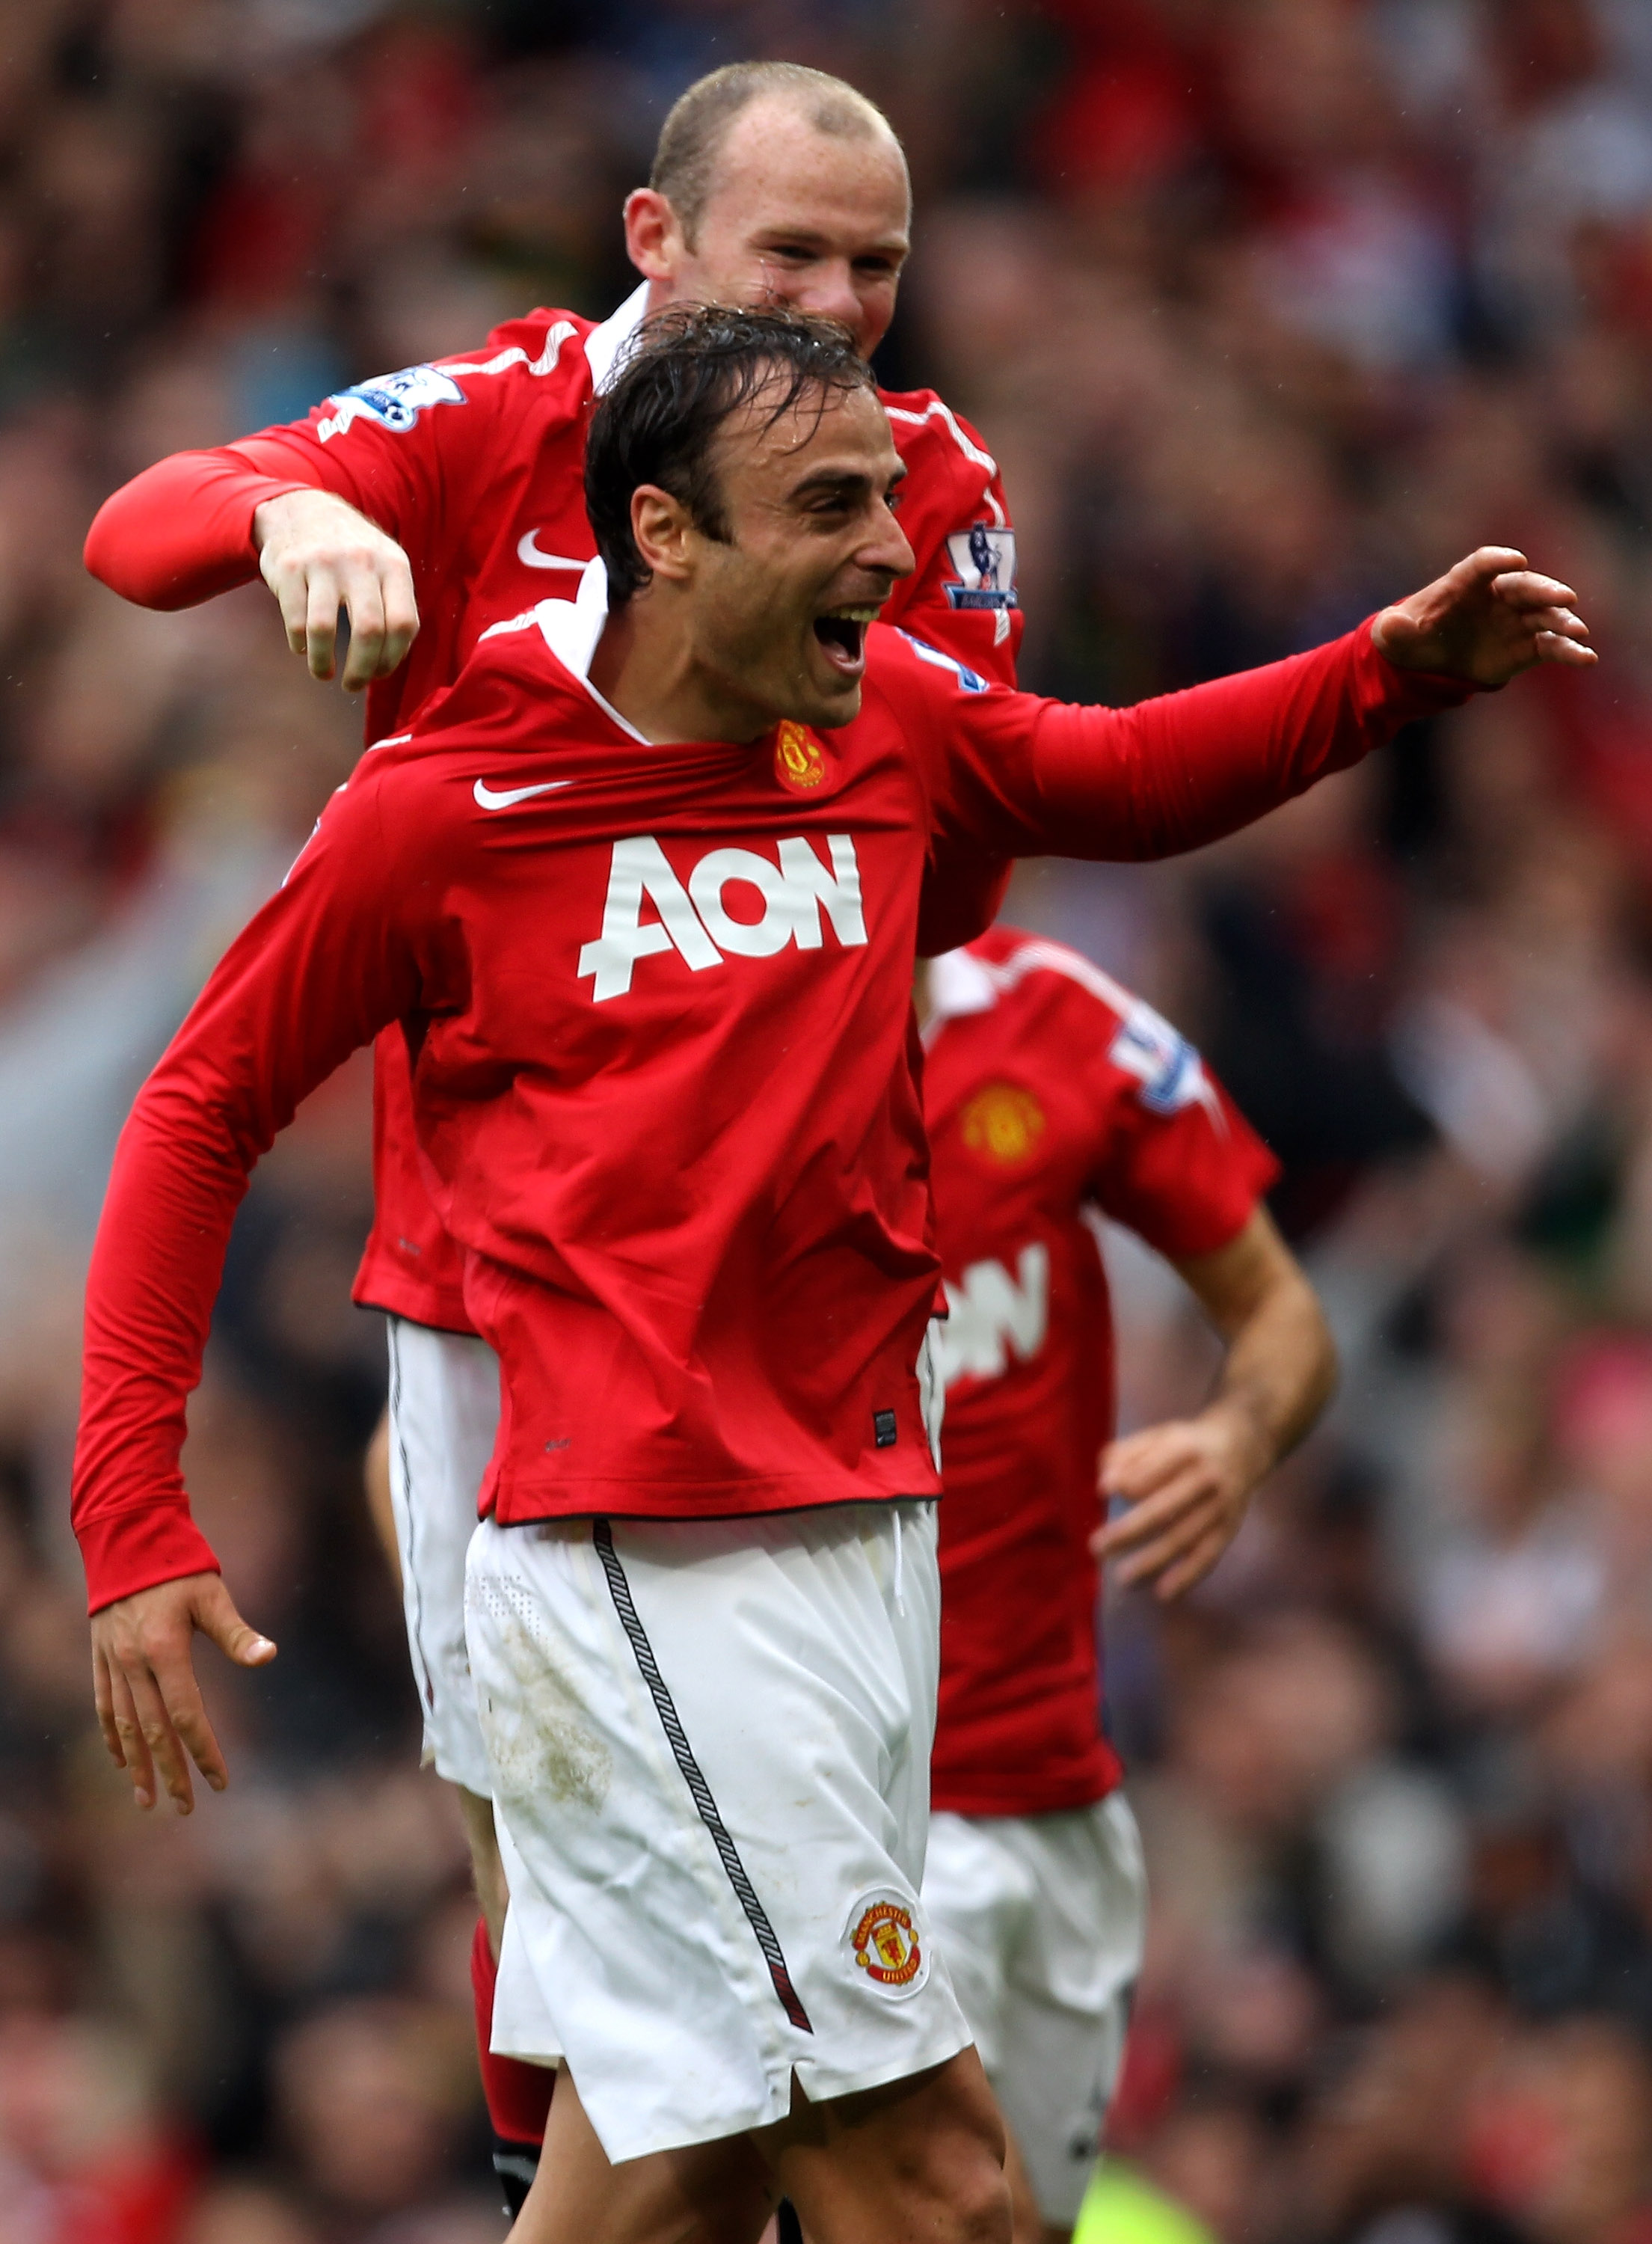 MANCHESTER, ENGLAND - SEPTEMBER 19:  Dimitar Berbatov of Manchester United celebrates scoring his team's second goal with team mate Wayne Rooney during the Barclays Premier League match between Manchester United and Liverpool at Old Trafford on September